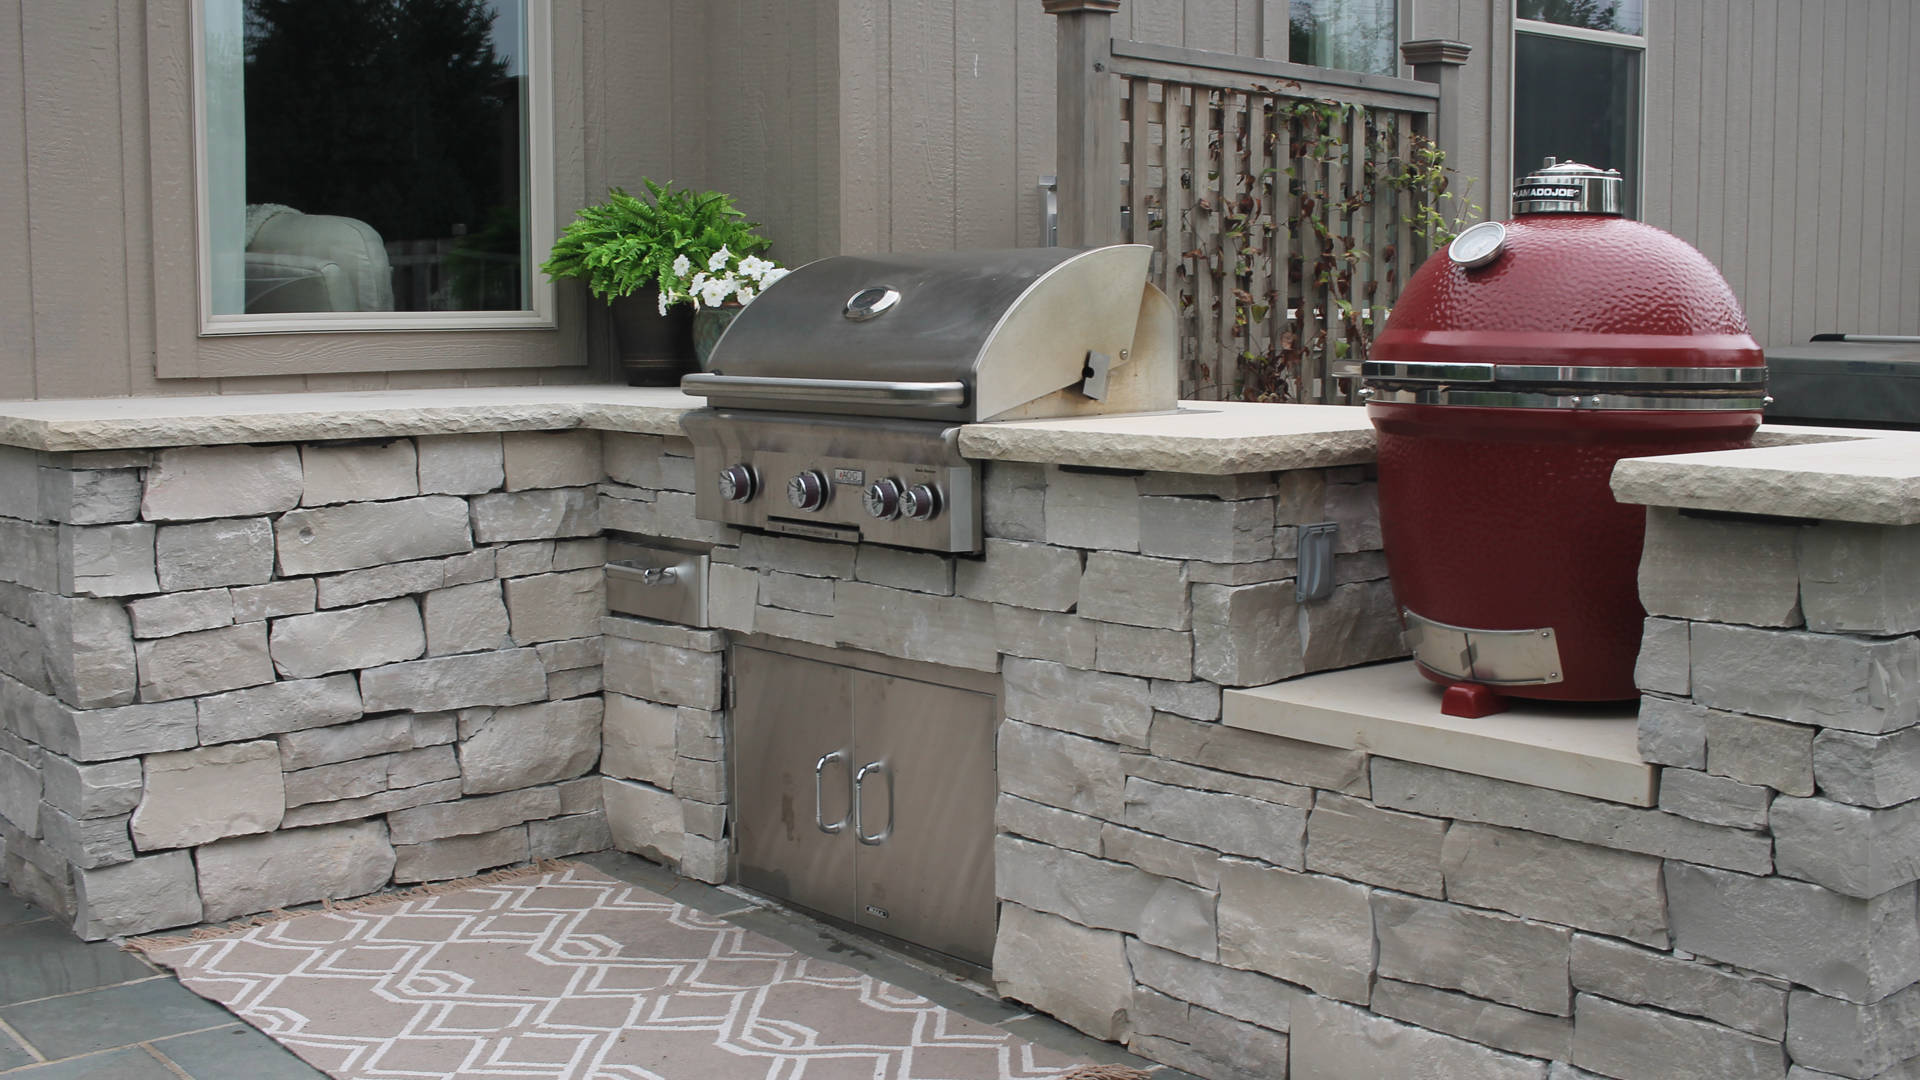 Beautiful outdoor kitchen with stones.